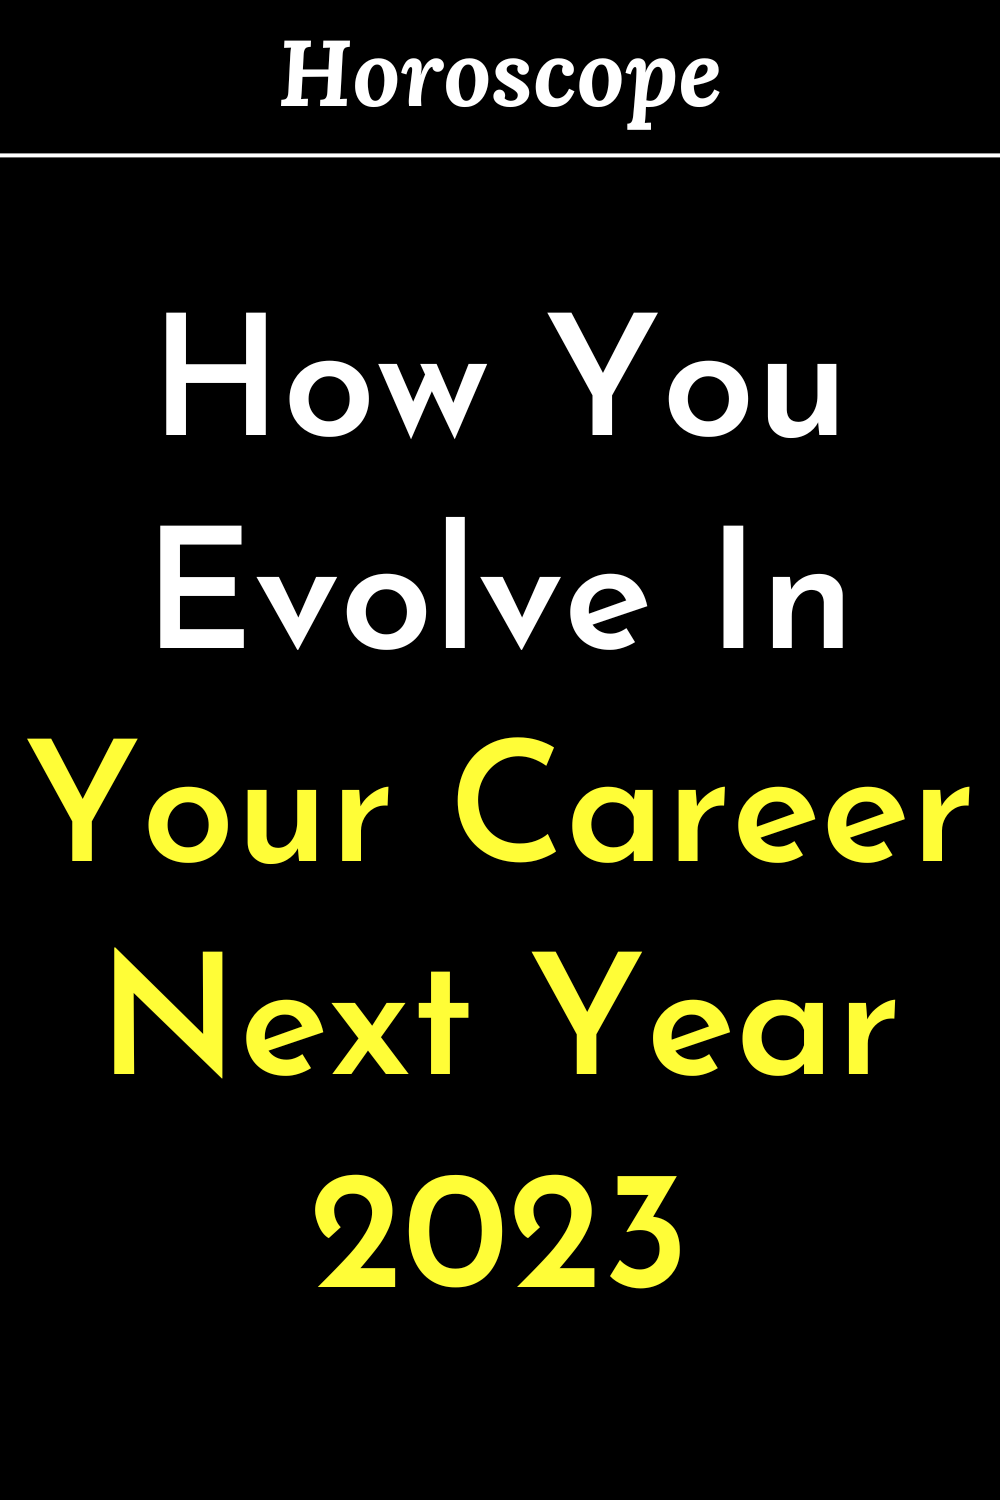 How You Evolve In Your Career Next Year 2023